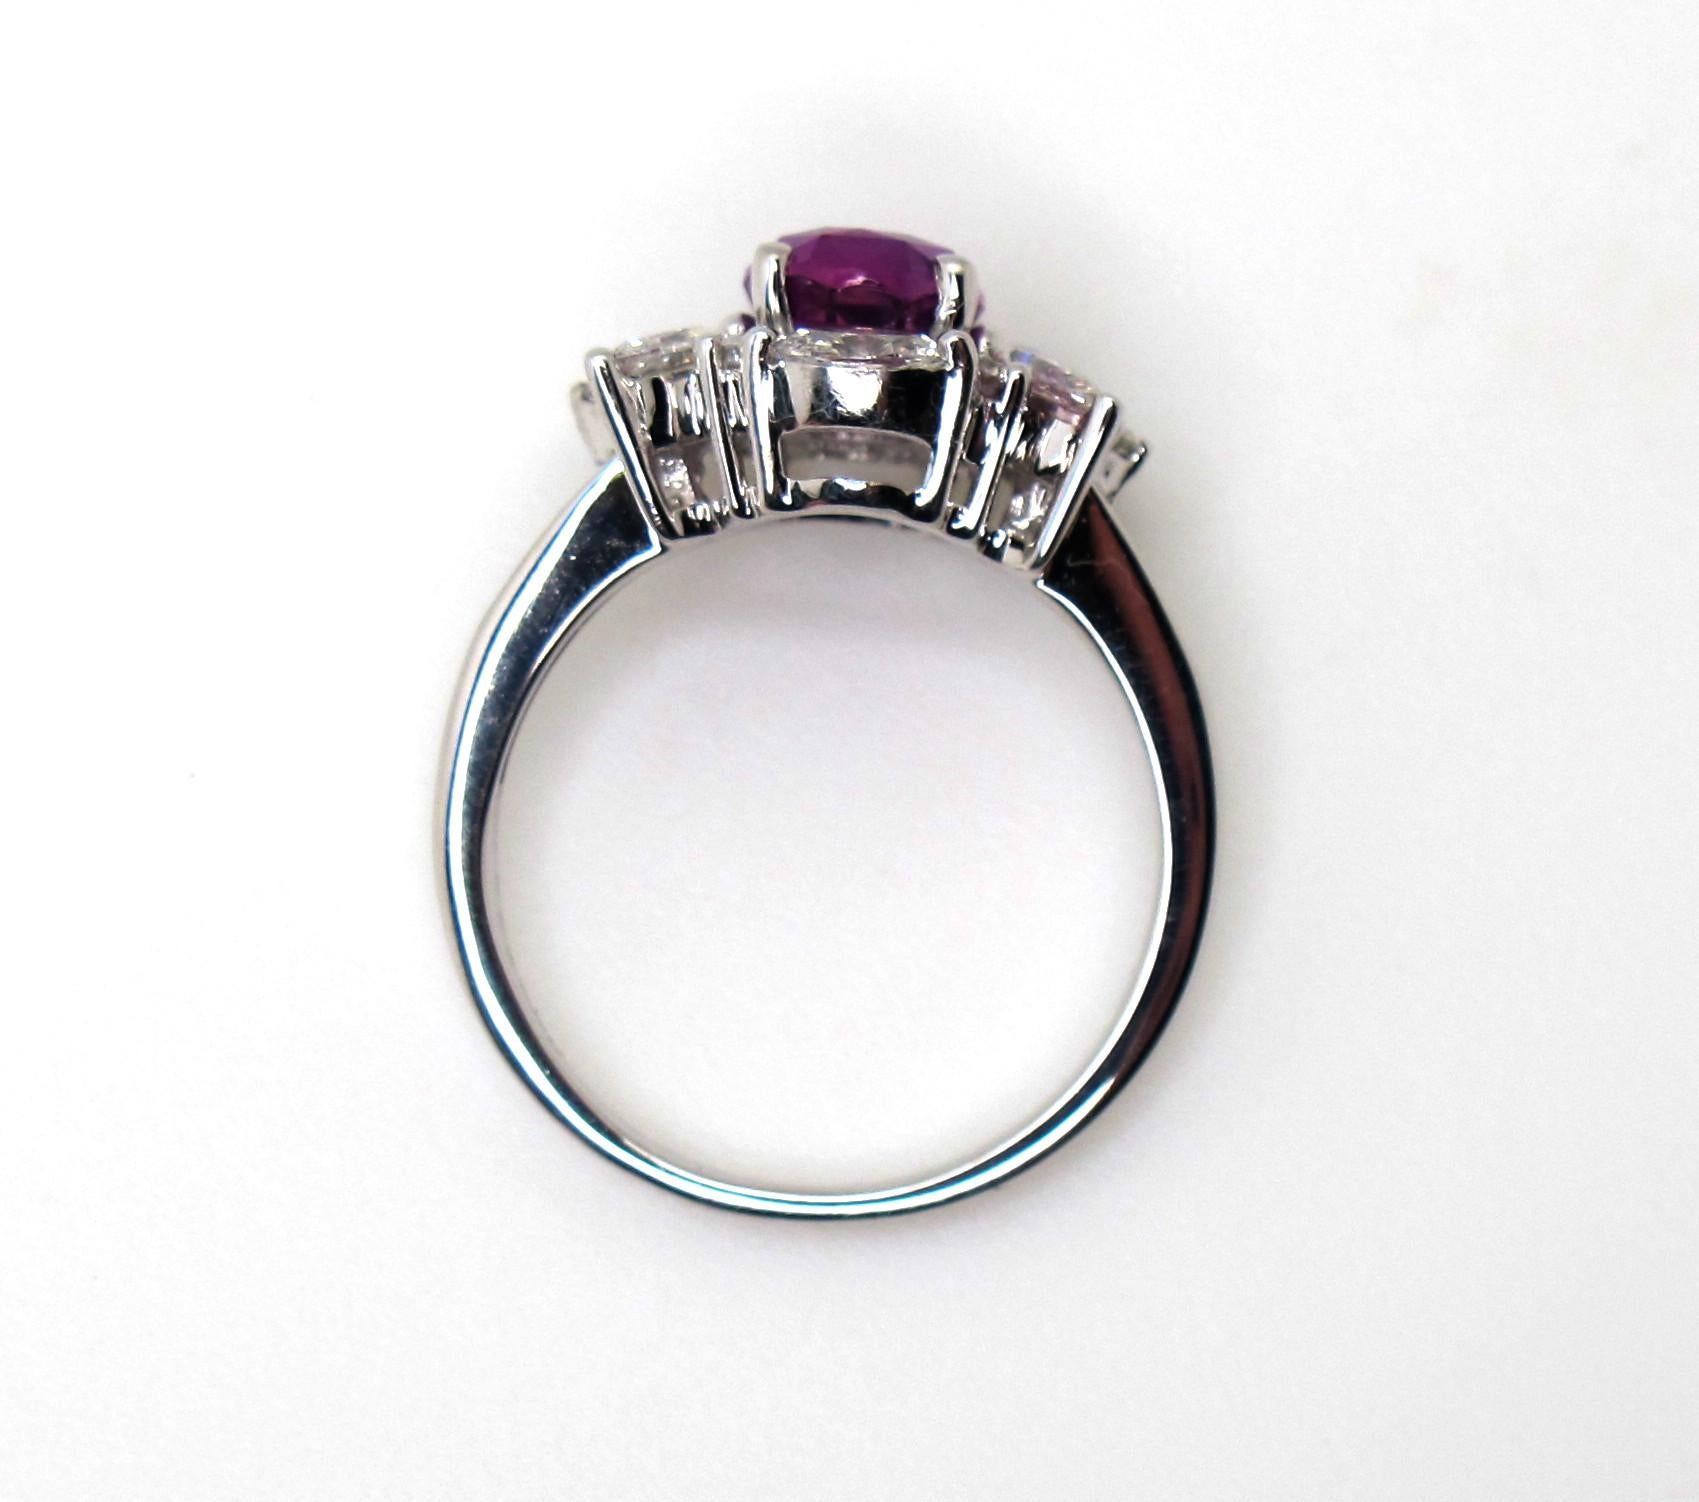 2.27 ct. Hot Pink Sapphire Oval, Diamond Marquise 18k White Gold Cocktail Ring 1